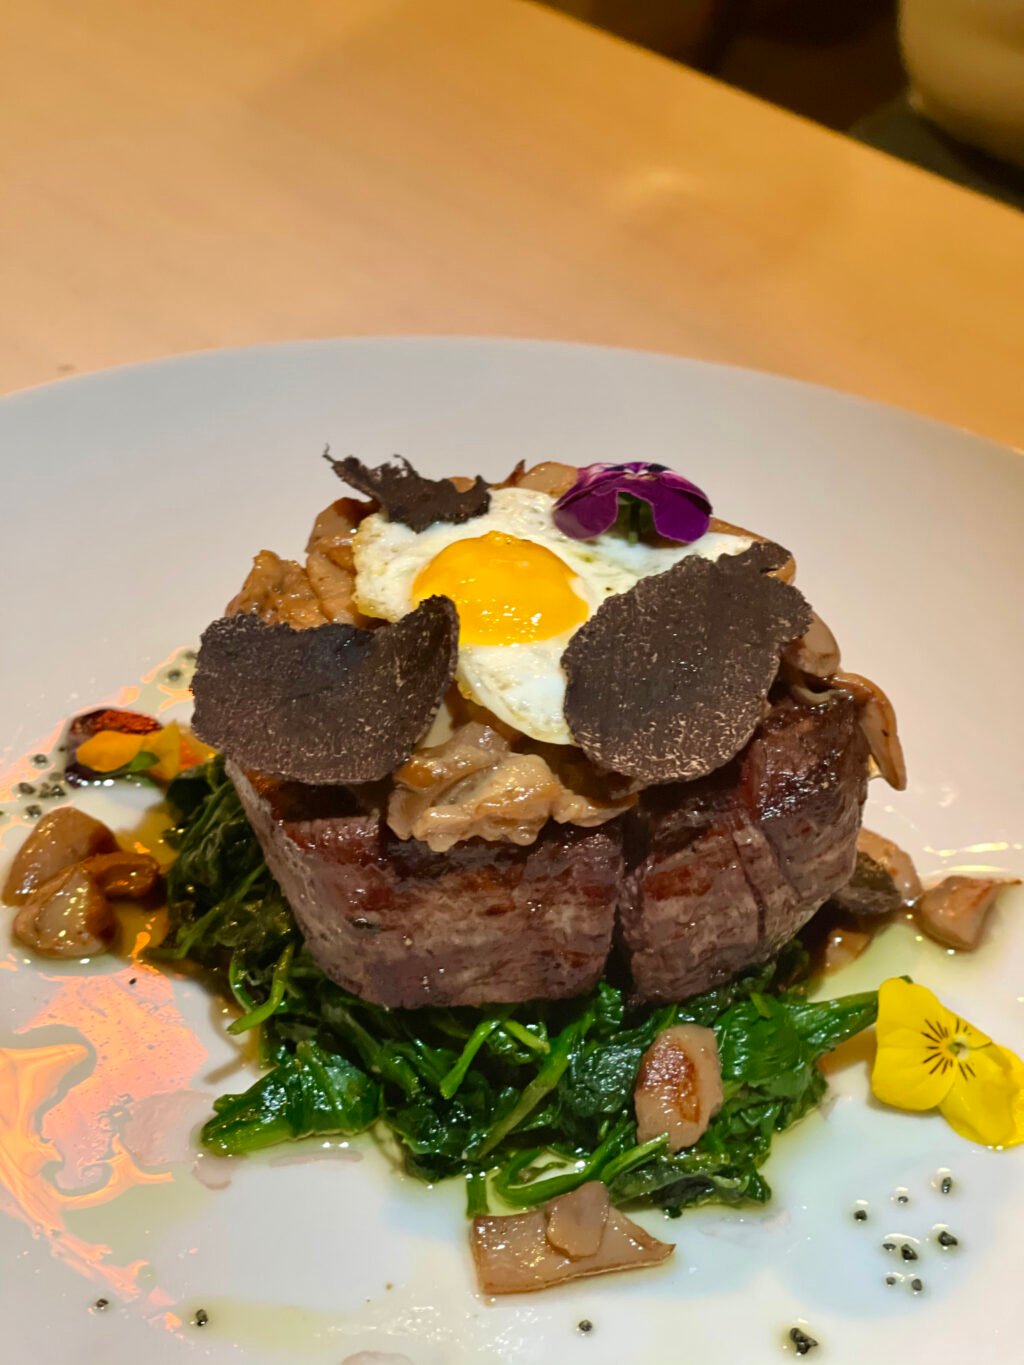 Filet mignon with mushrooms and quail egg